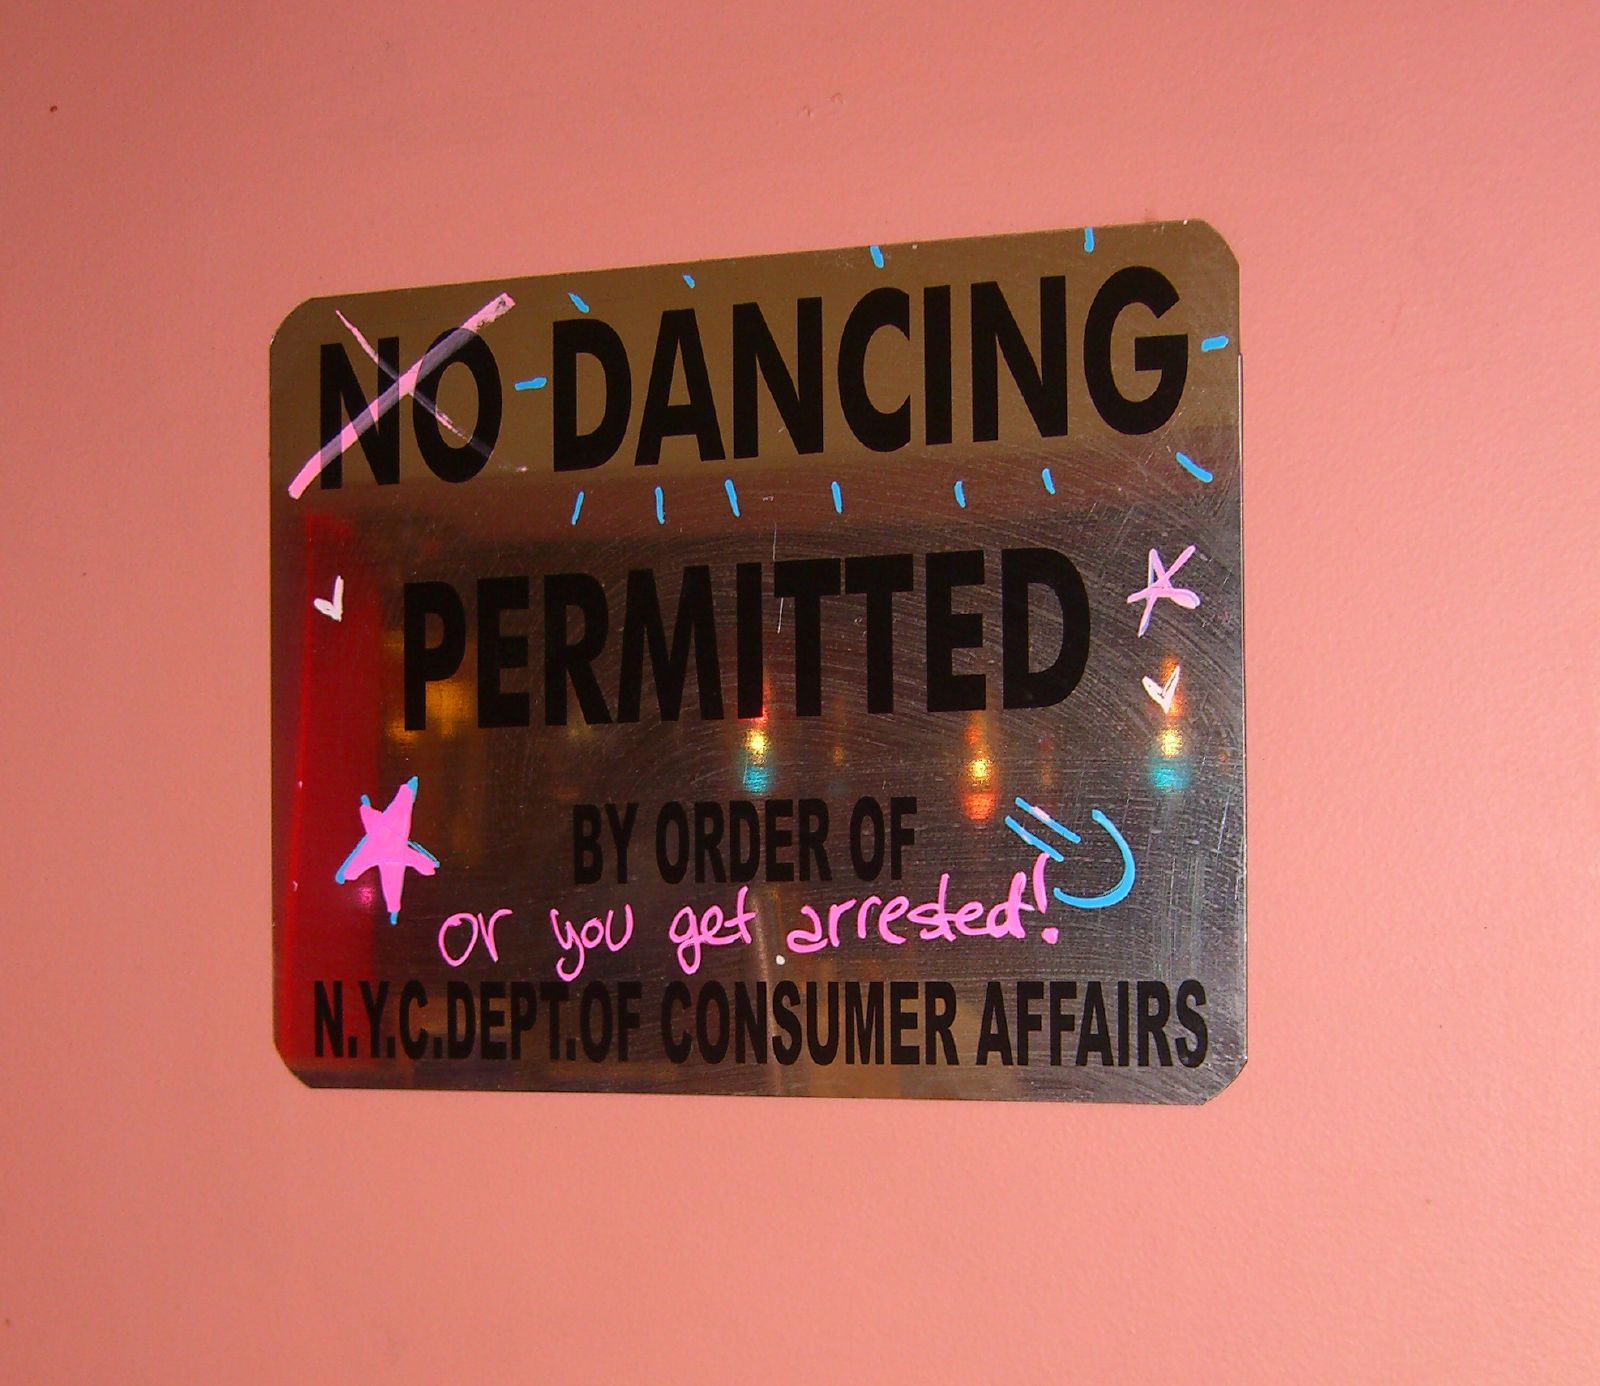 "NO DANCING PERMITTED" by Scott Kidder is licensed under CC BY-NC-ND 2.0 https://www.flickr.com/photos/skidder/30770623/